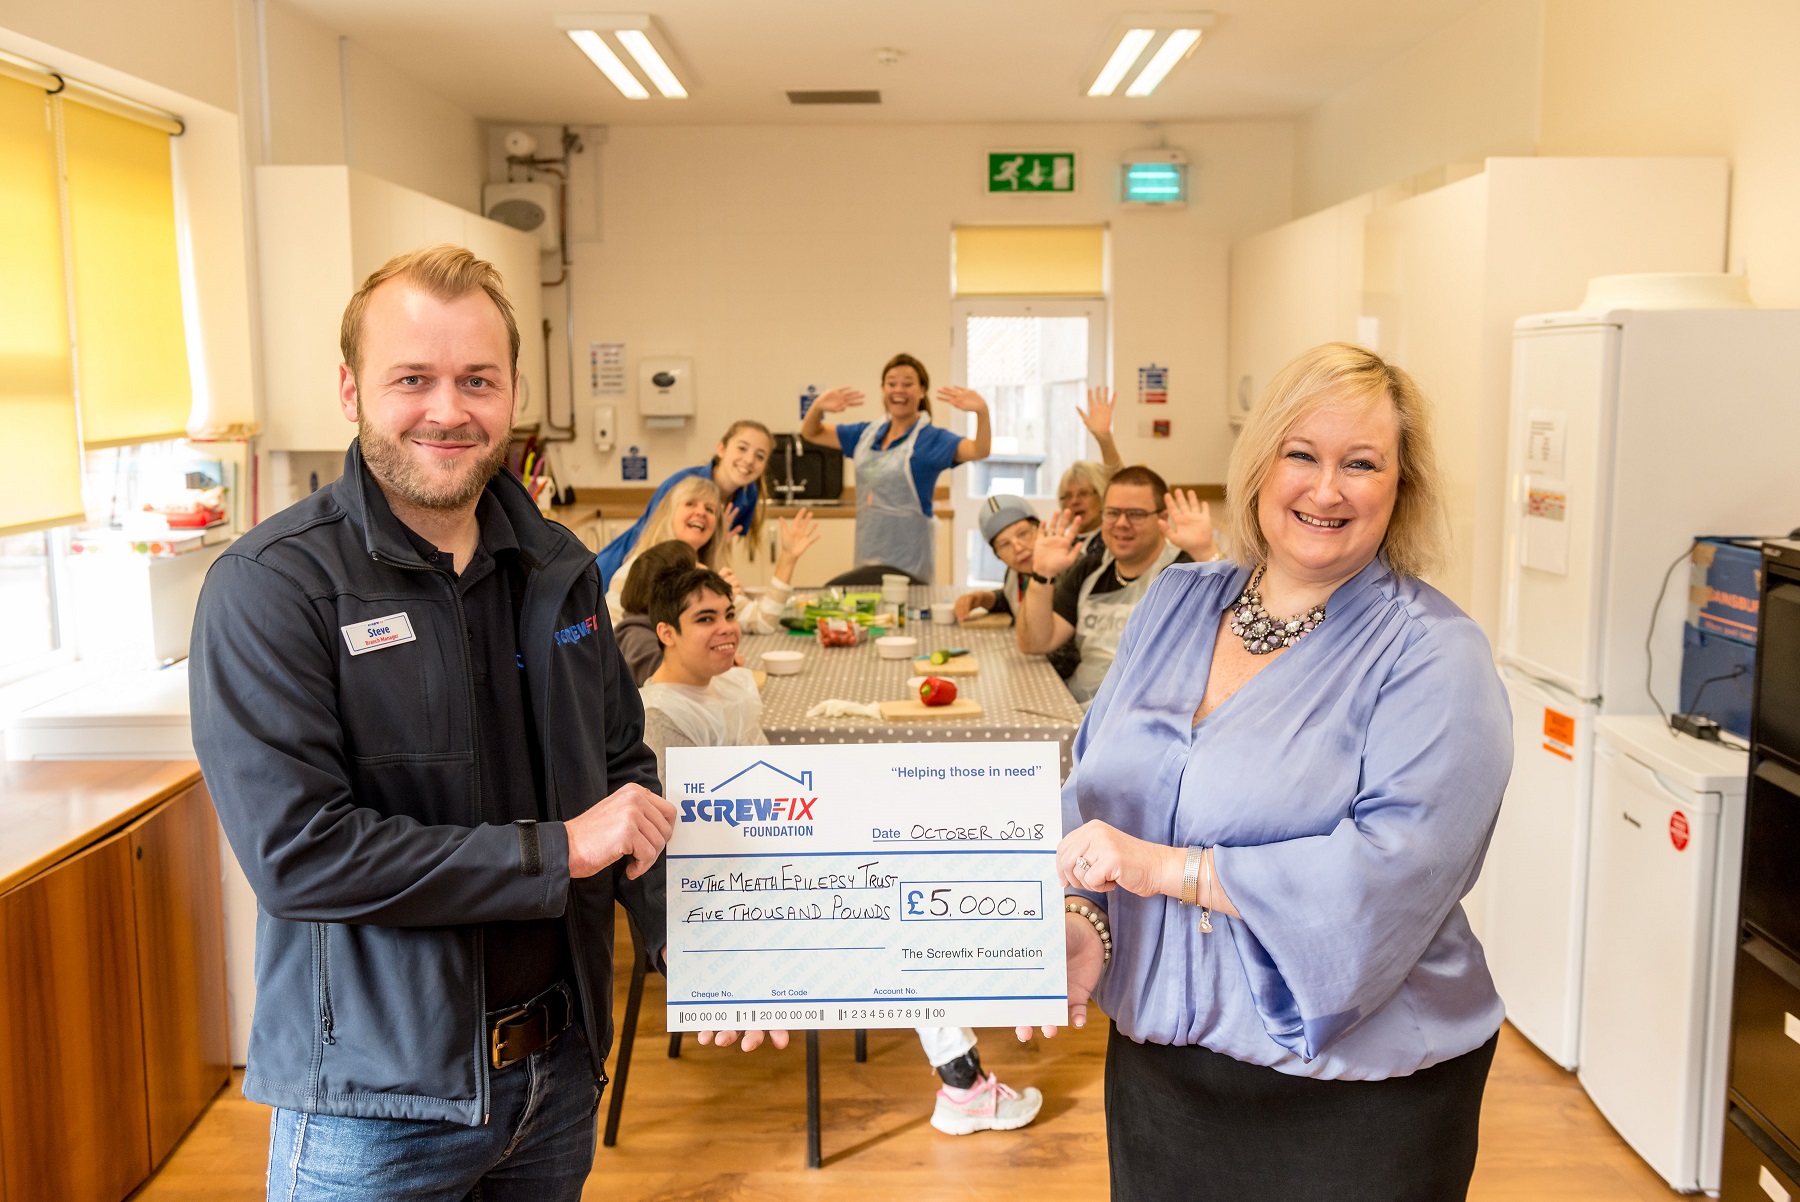 The Meath Epilepsy charity gets a helping hand from the Screwfix Foundation